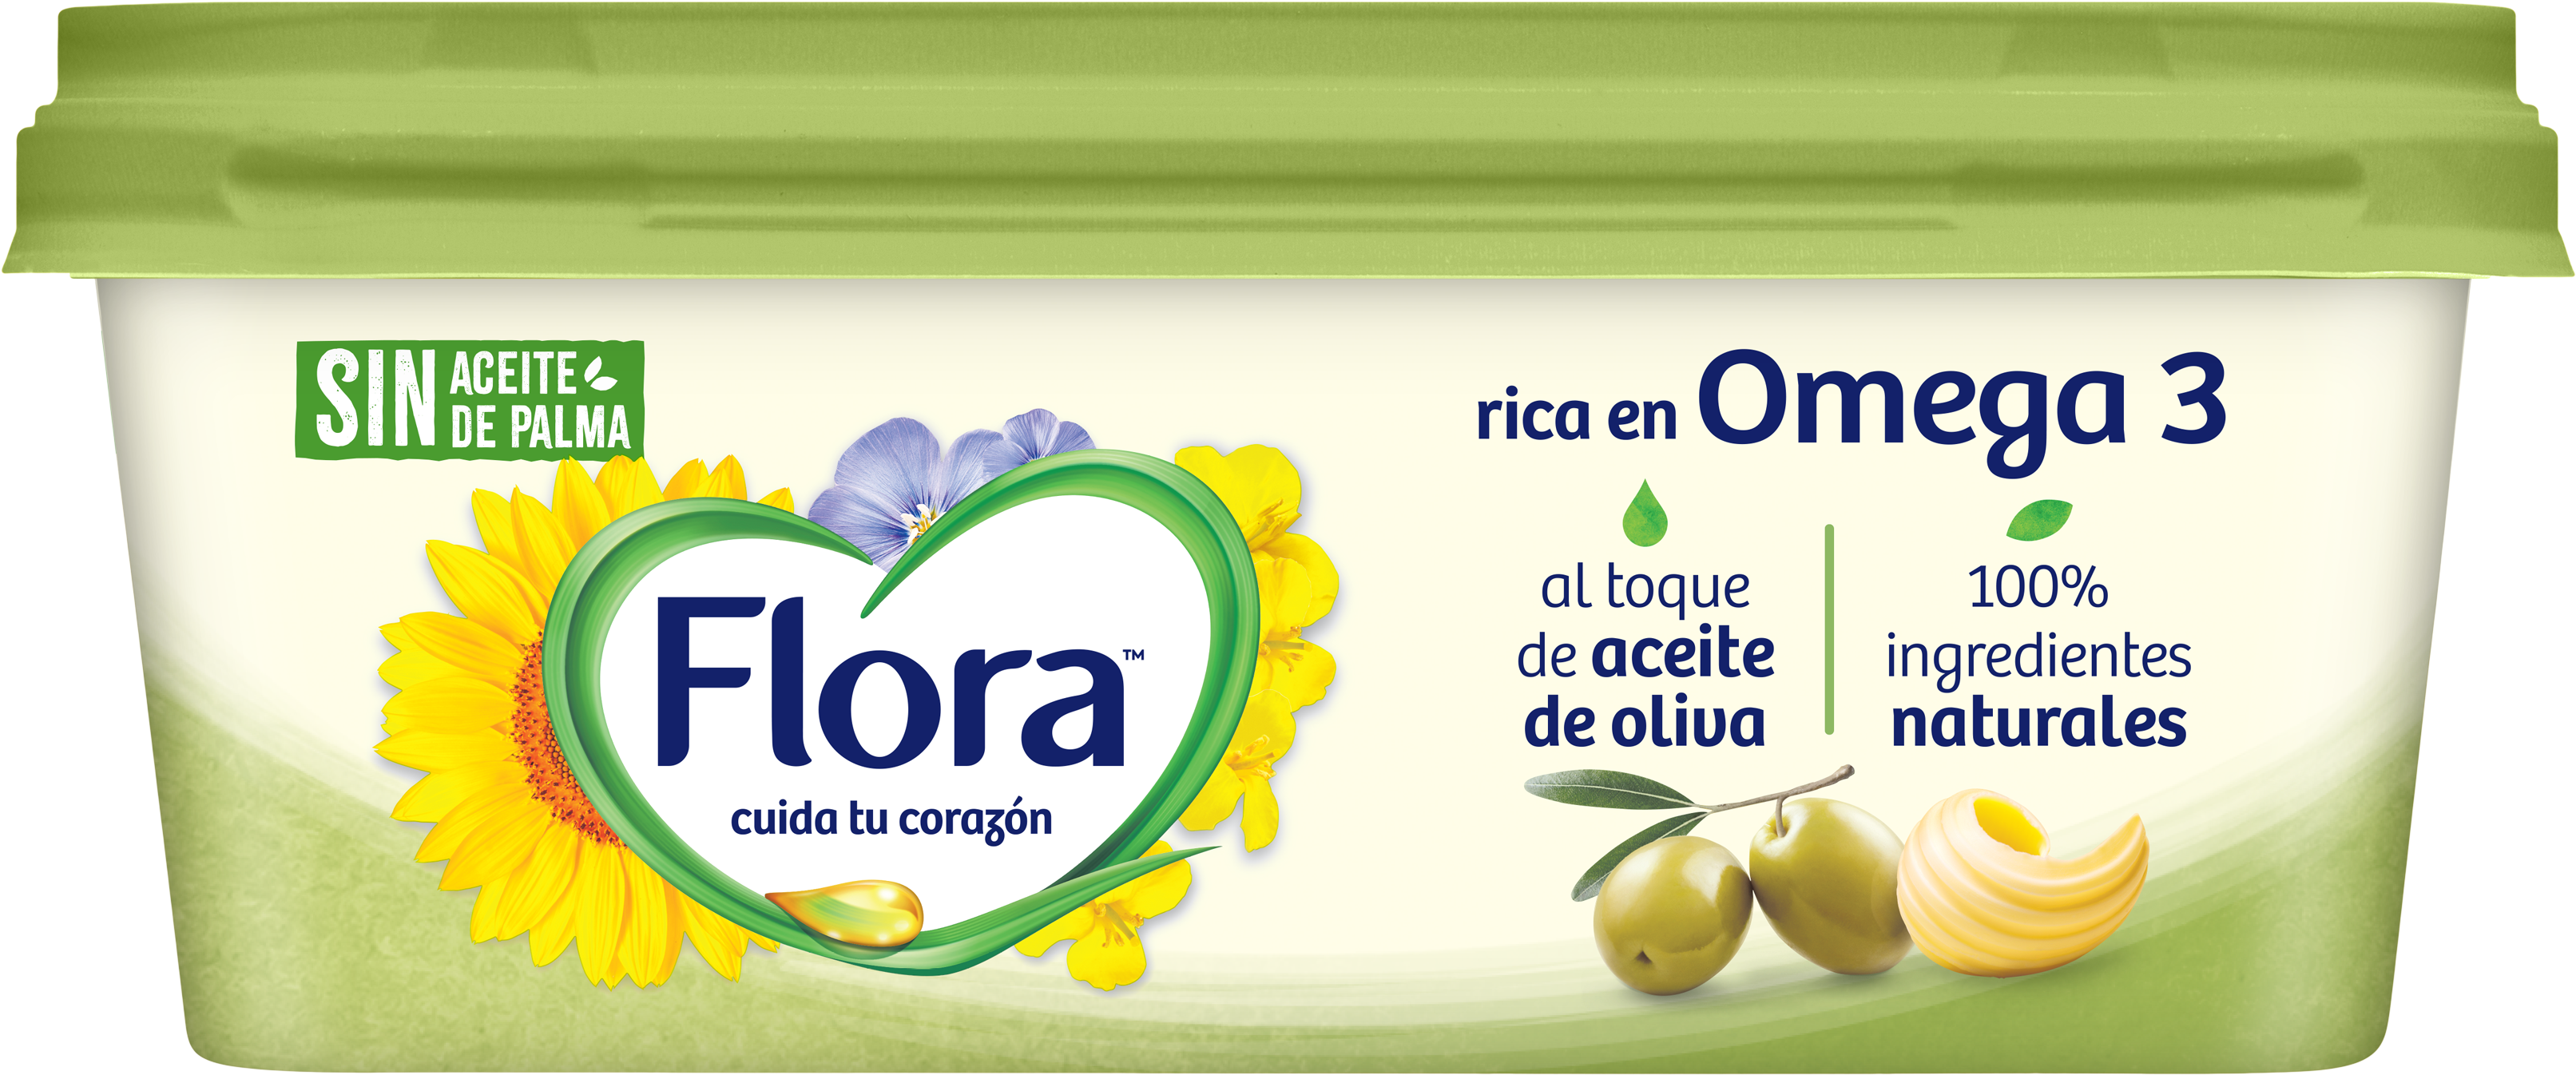 Product Page, Flora Oliva 225g